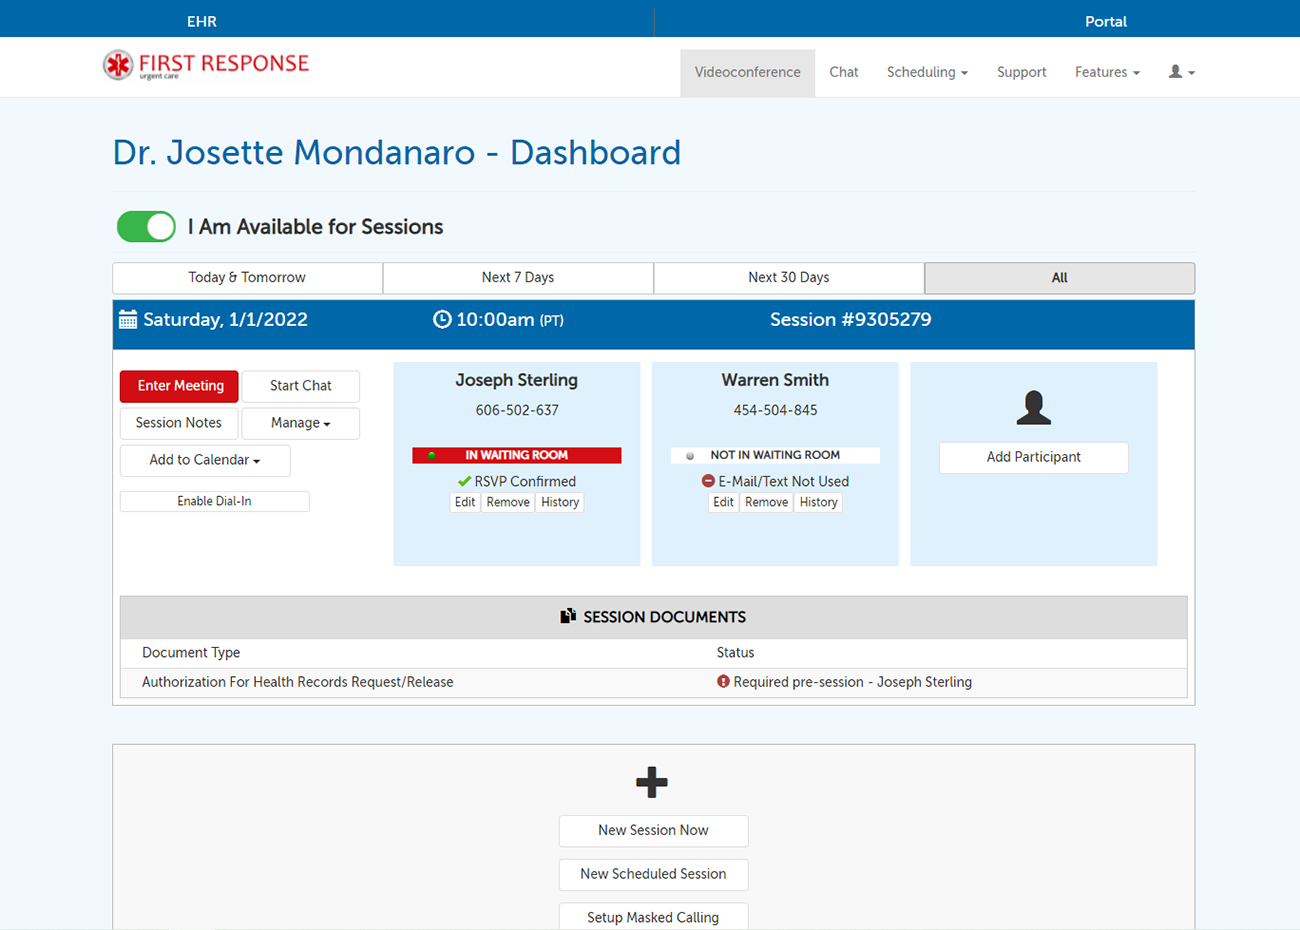 The SecureVideo user's dashboard displays any scheduled telehealth sessions, and allows for the easy creation of new ones. All functions and features that support a great telehealth experience begin right here